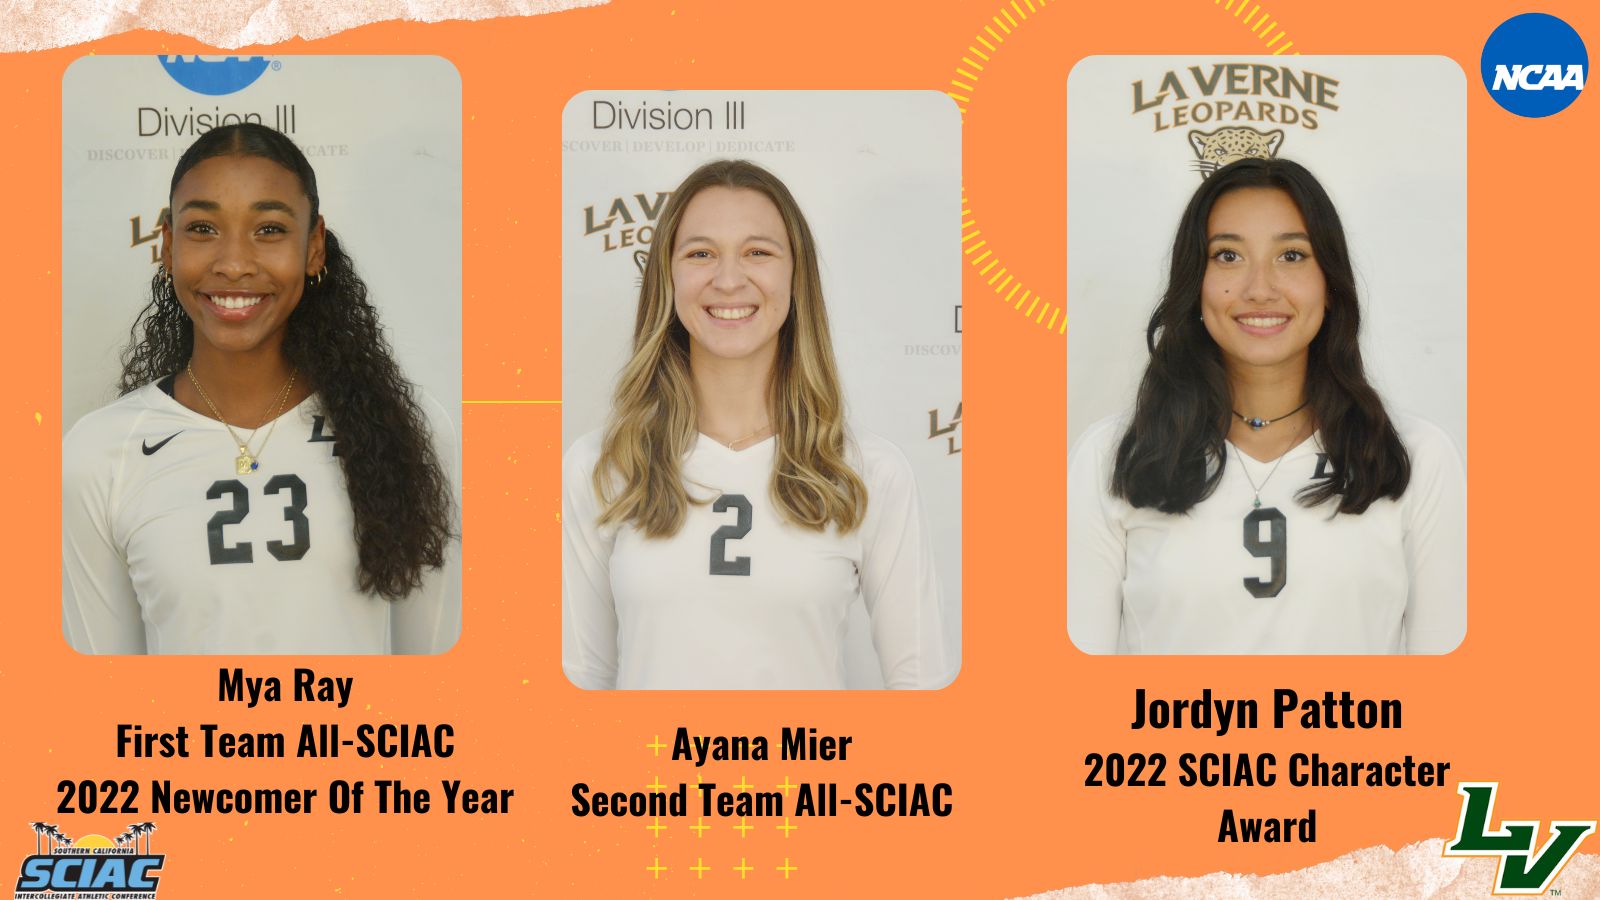 Three Leopards Honored With Post-Season Awards